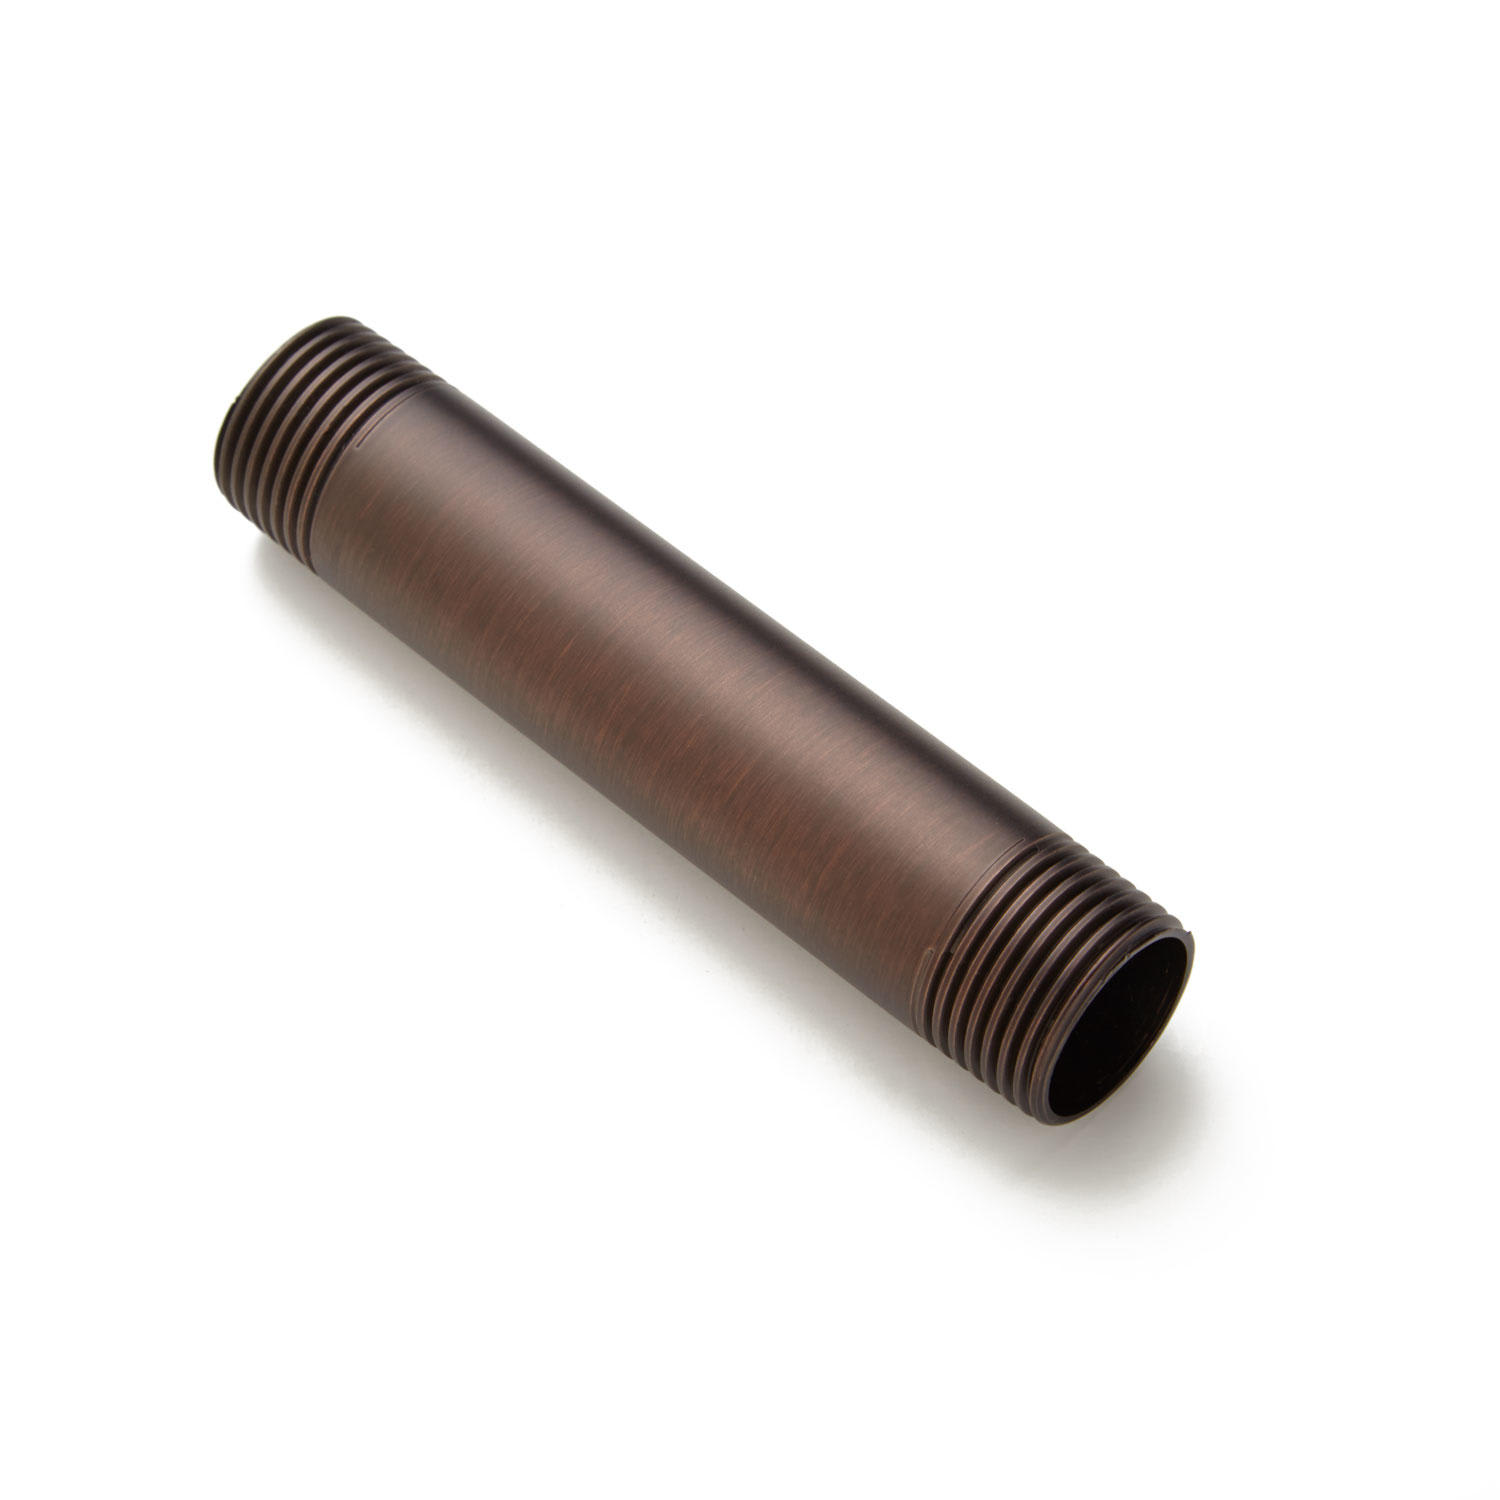 Details about   Groco PNC-500 1/2" Bronze Check Nipple 